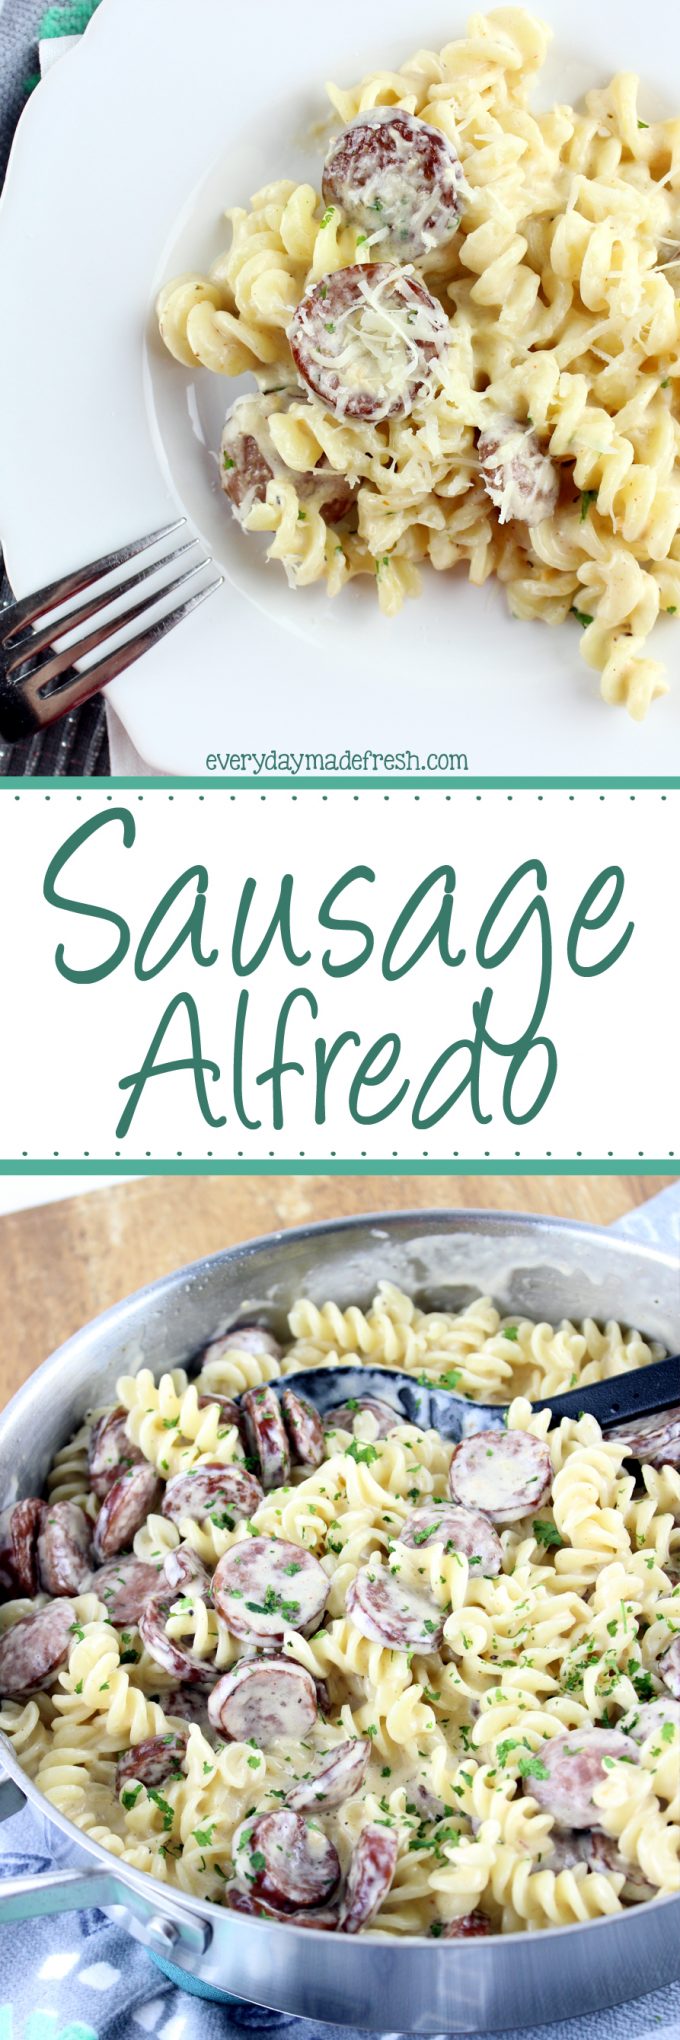 Creamy alfredo sauce, cajun seasoning, and smoked sausage make this Sausage Alfredo a dinner with 5 ingredients, and ready in less than 20 minutes. | EverydayMadeFresh.com